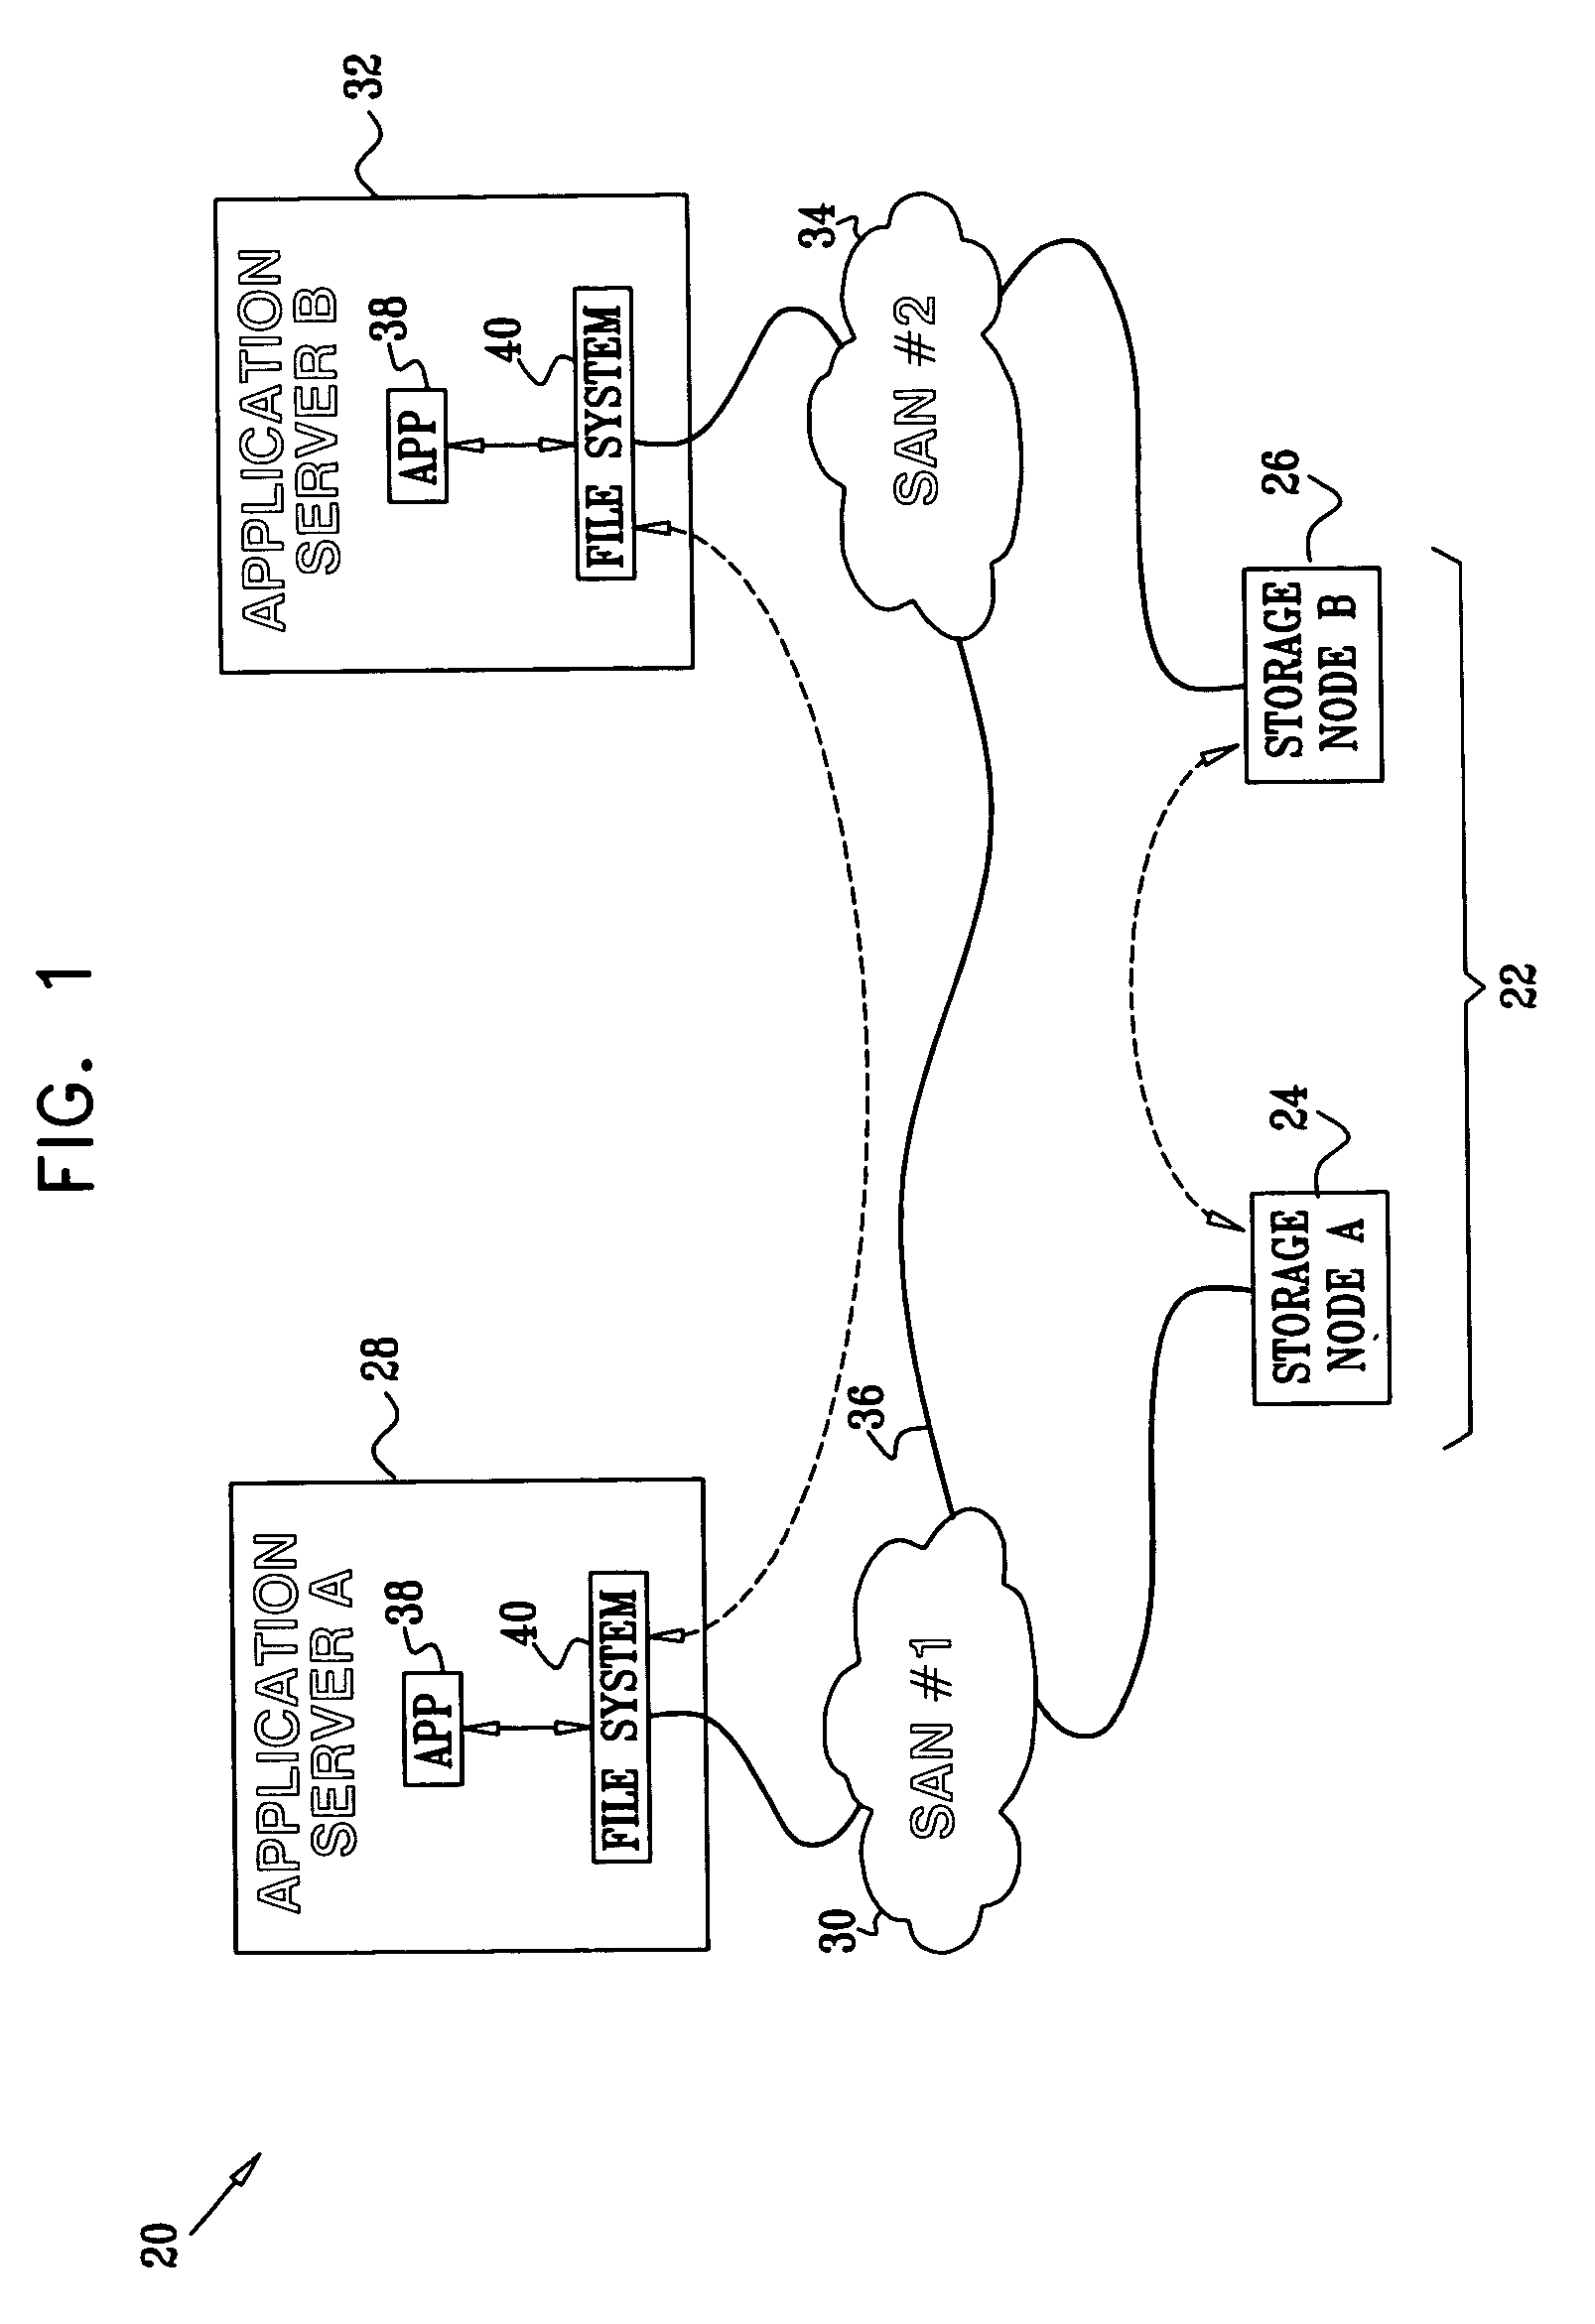 Storage system with symmetrical mirroring